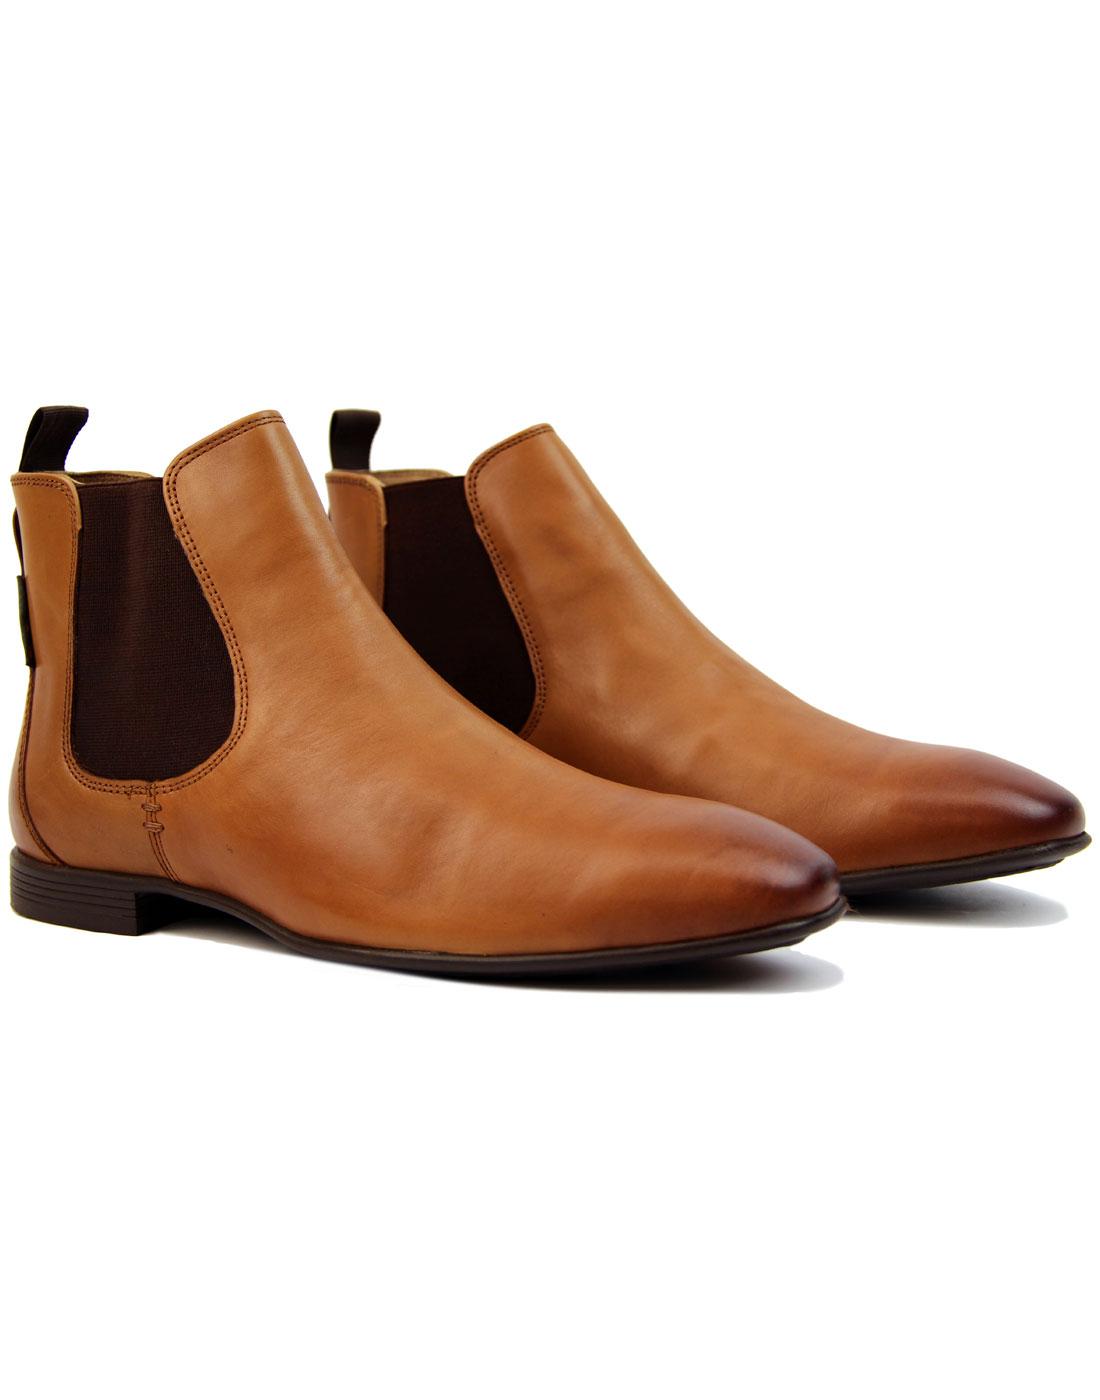 BEN SHERMAN Archibald 60s Mod Smooth Leather Chelsea Boots in Tan